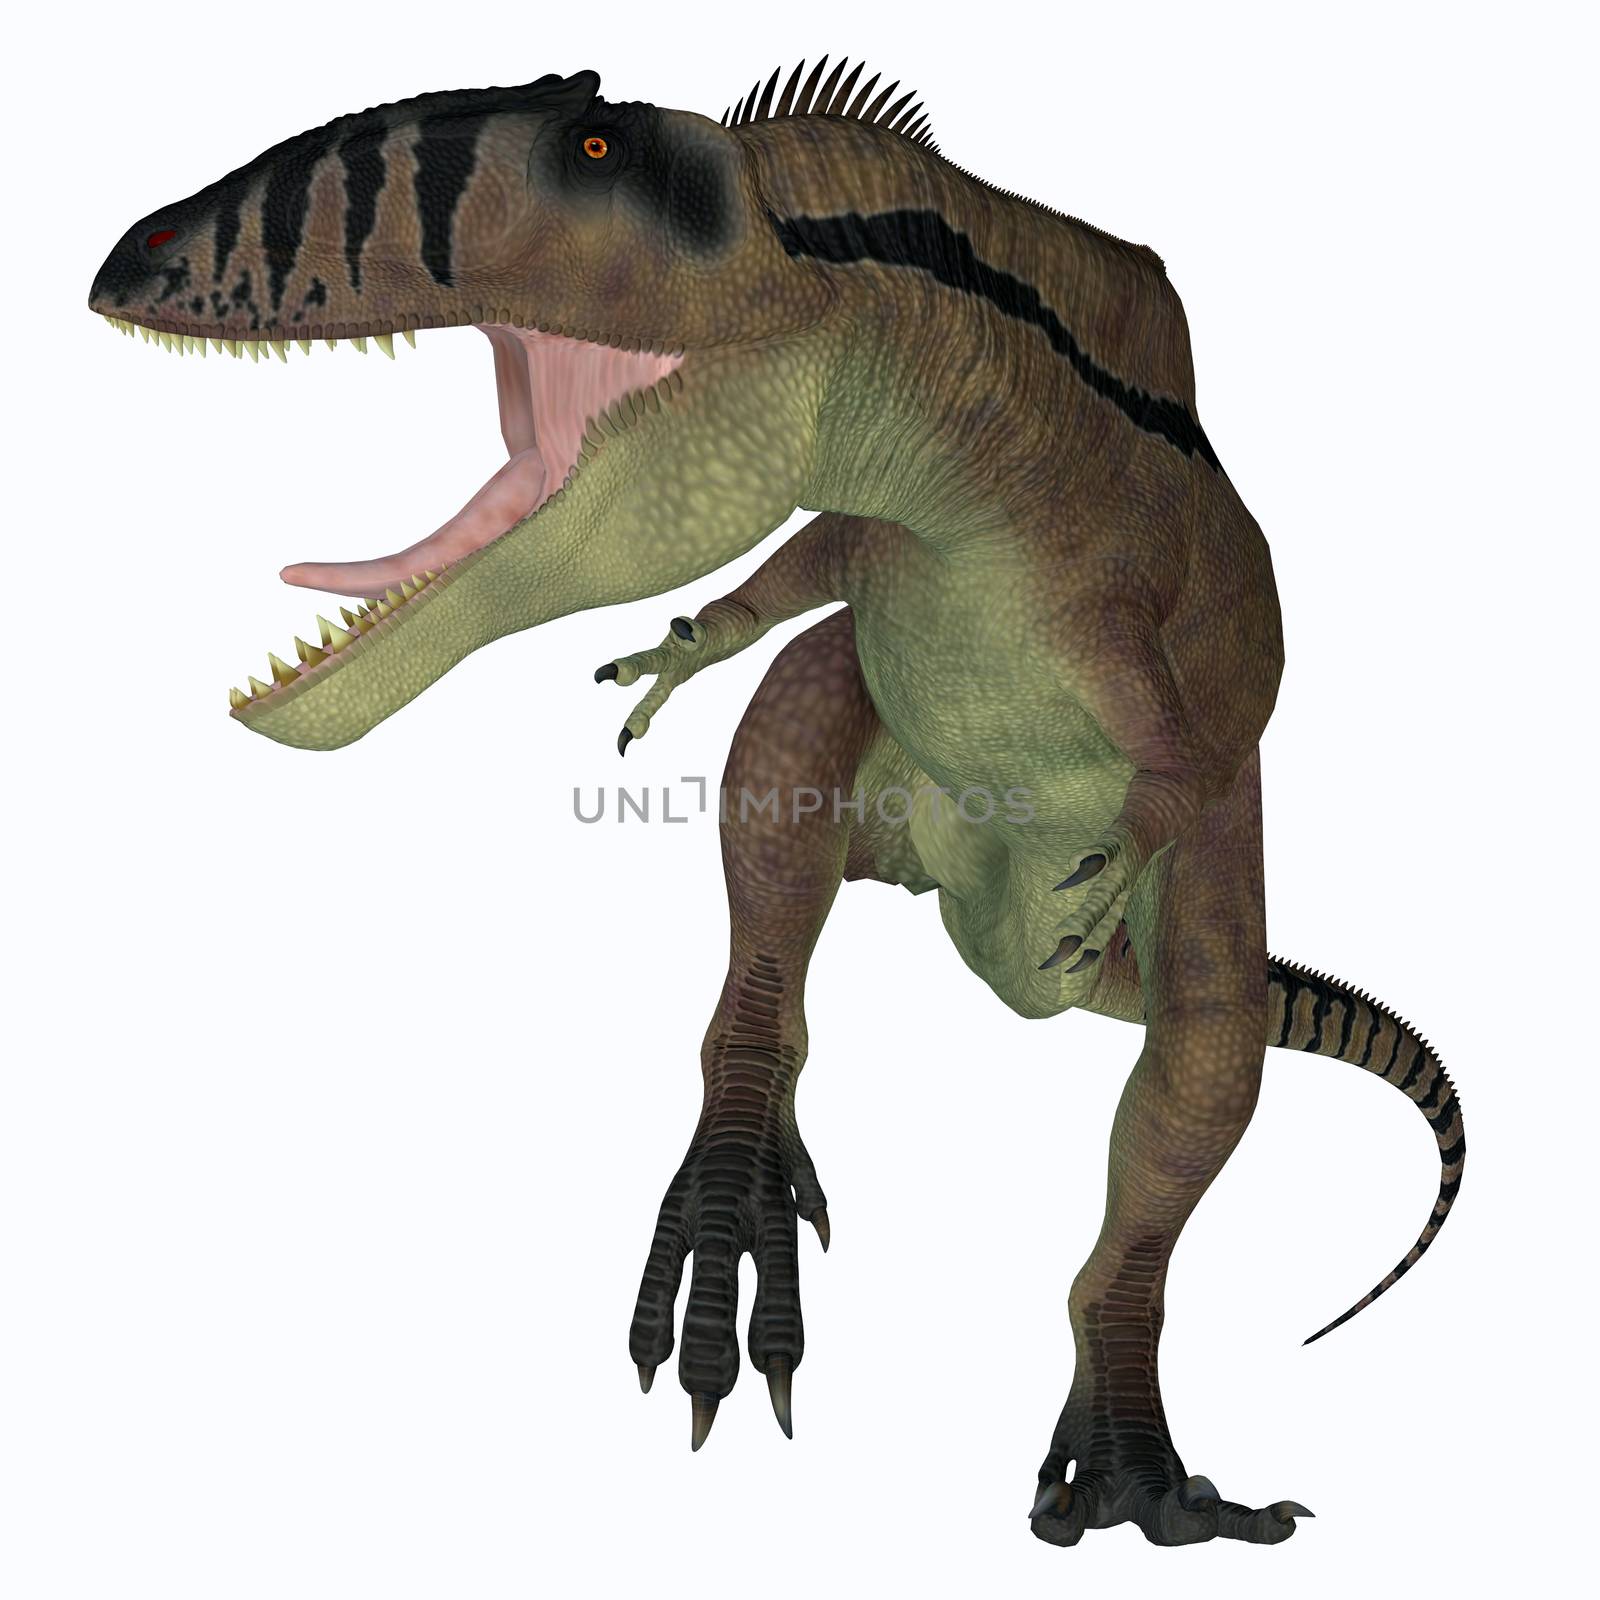 Carcharodontosaurus was a predatory theropod dinosaur that lived in the Sahara, Africa during the Cretaceous Period.